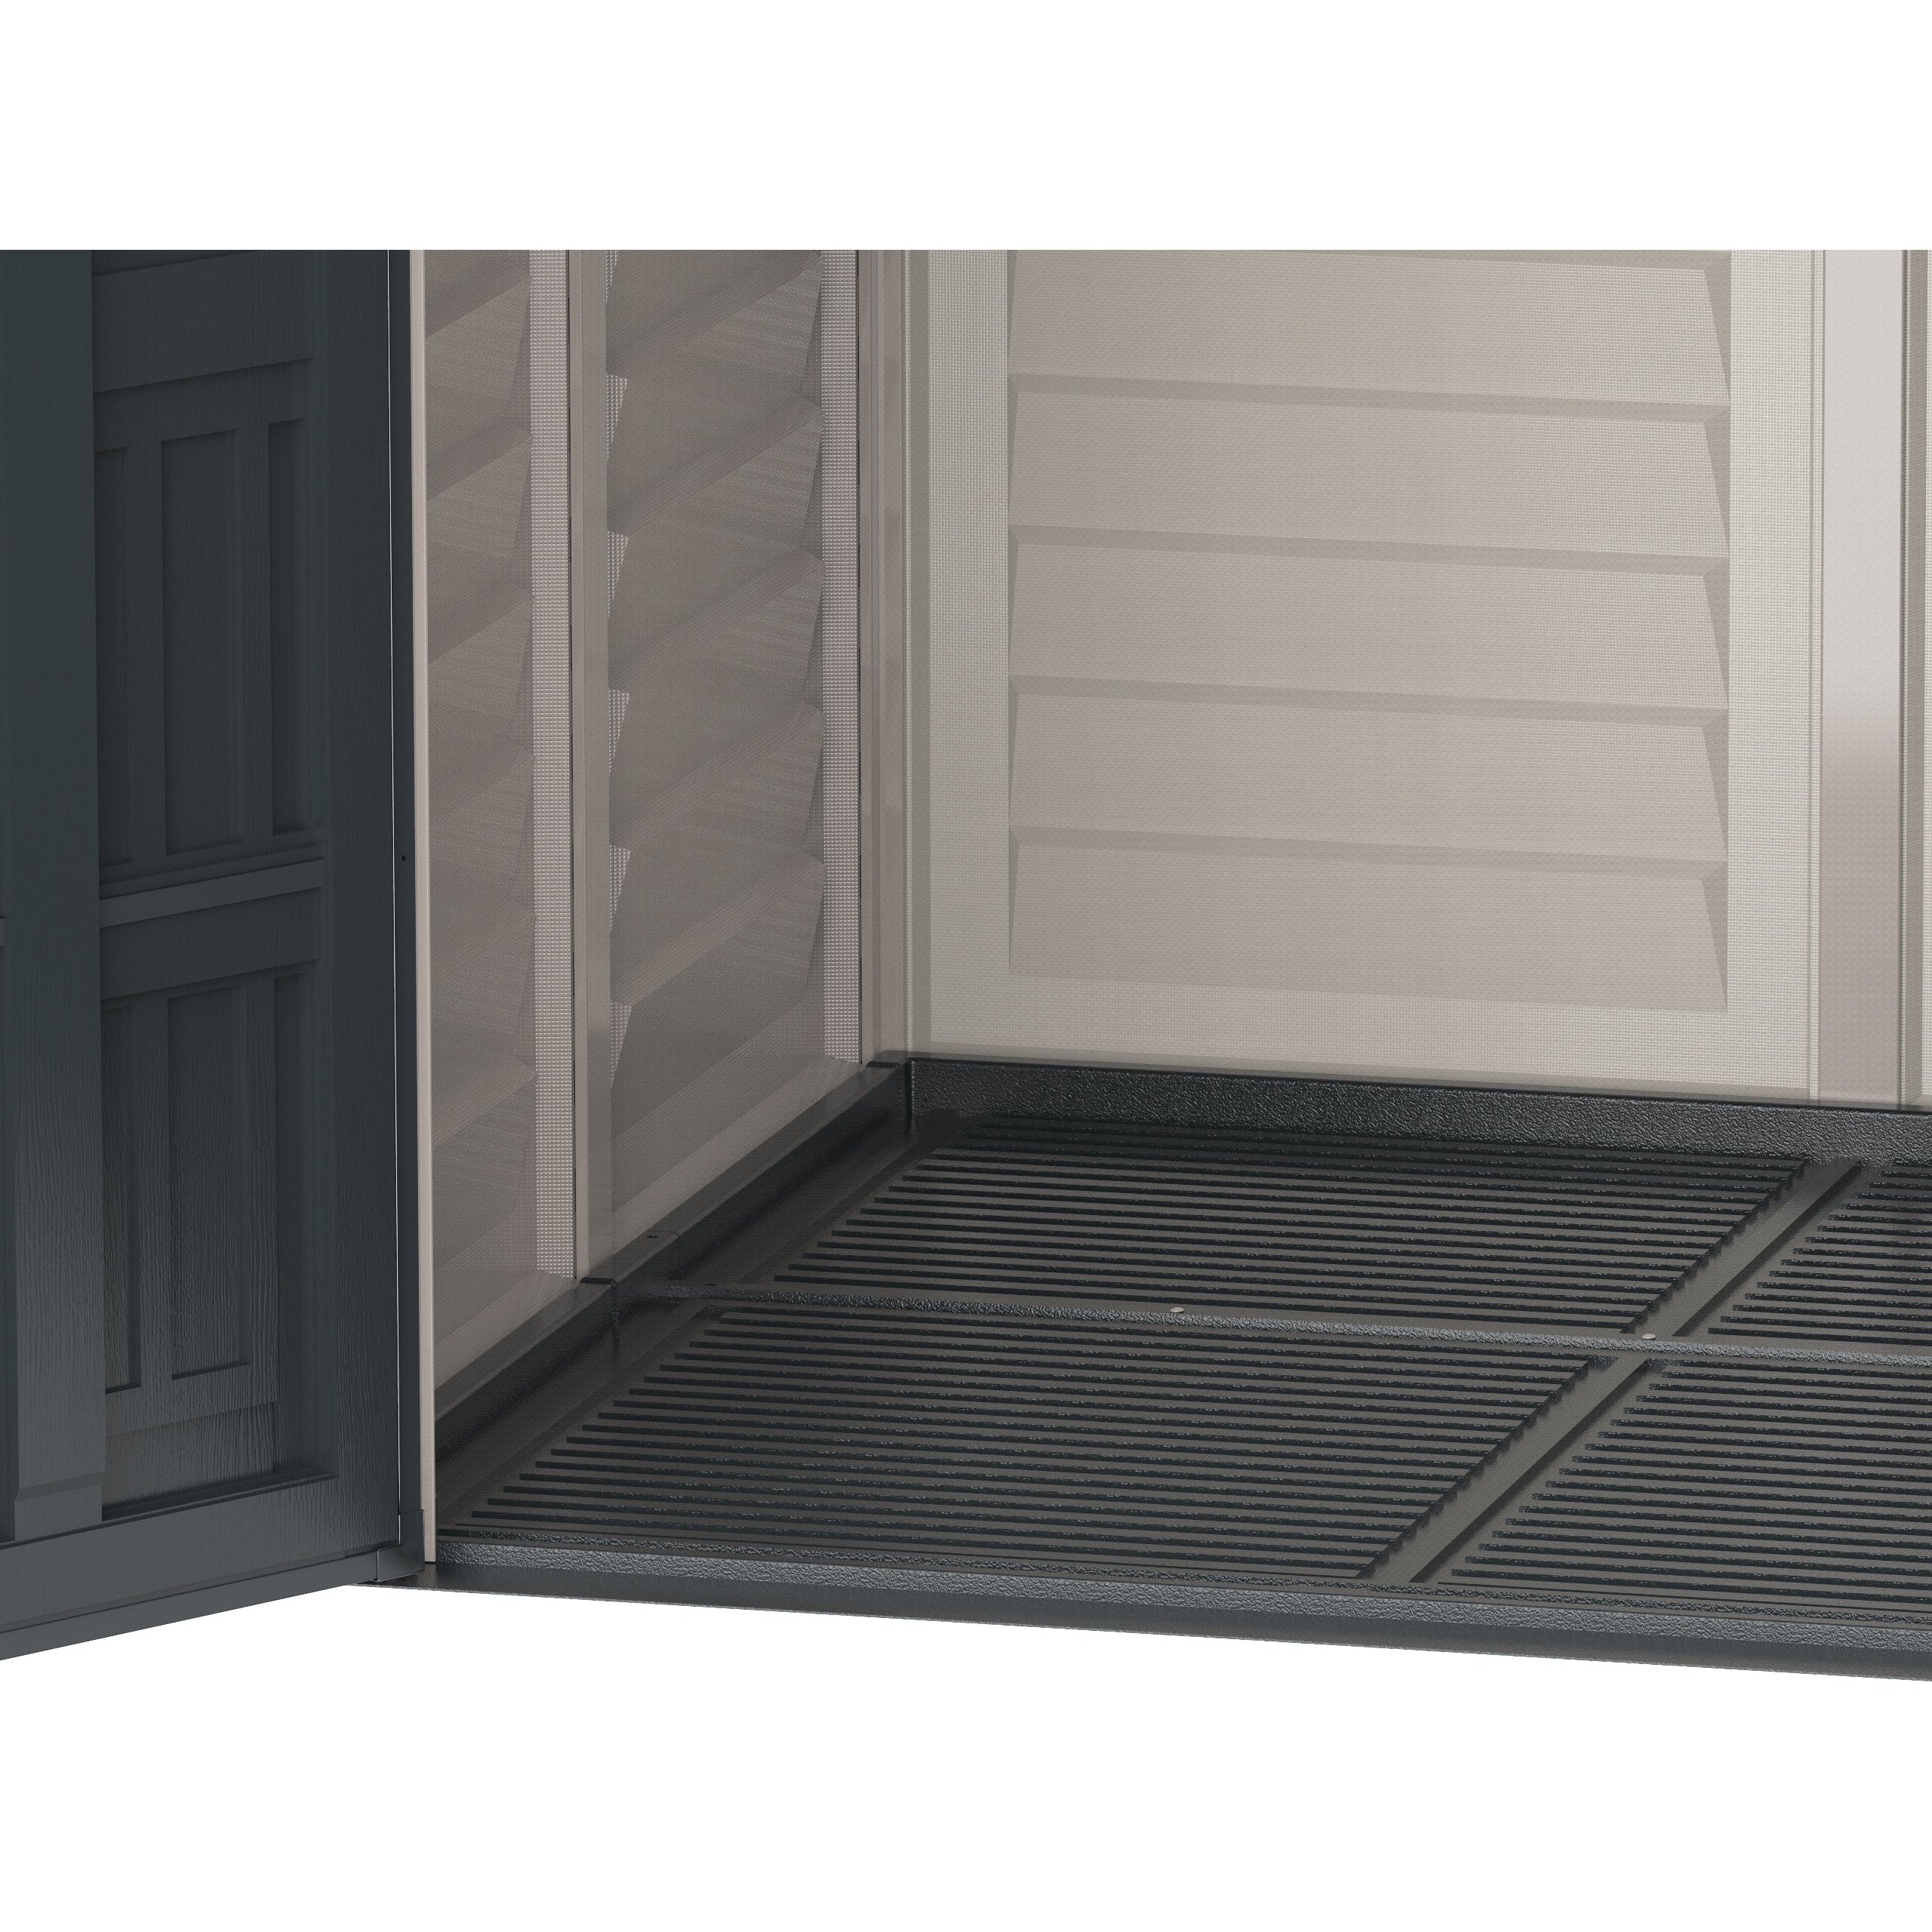 Duramax Vinyl Sheds Duramax YardMate Plus 5 ft. 6 in. x 5ft. 6 in. Gray Vinyl Storage Shed with Molded Floor (East Coast Purchase Only)